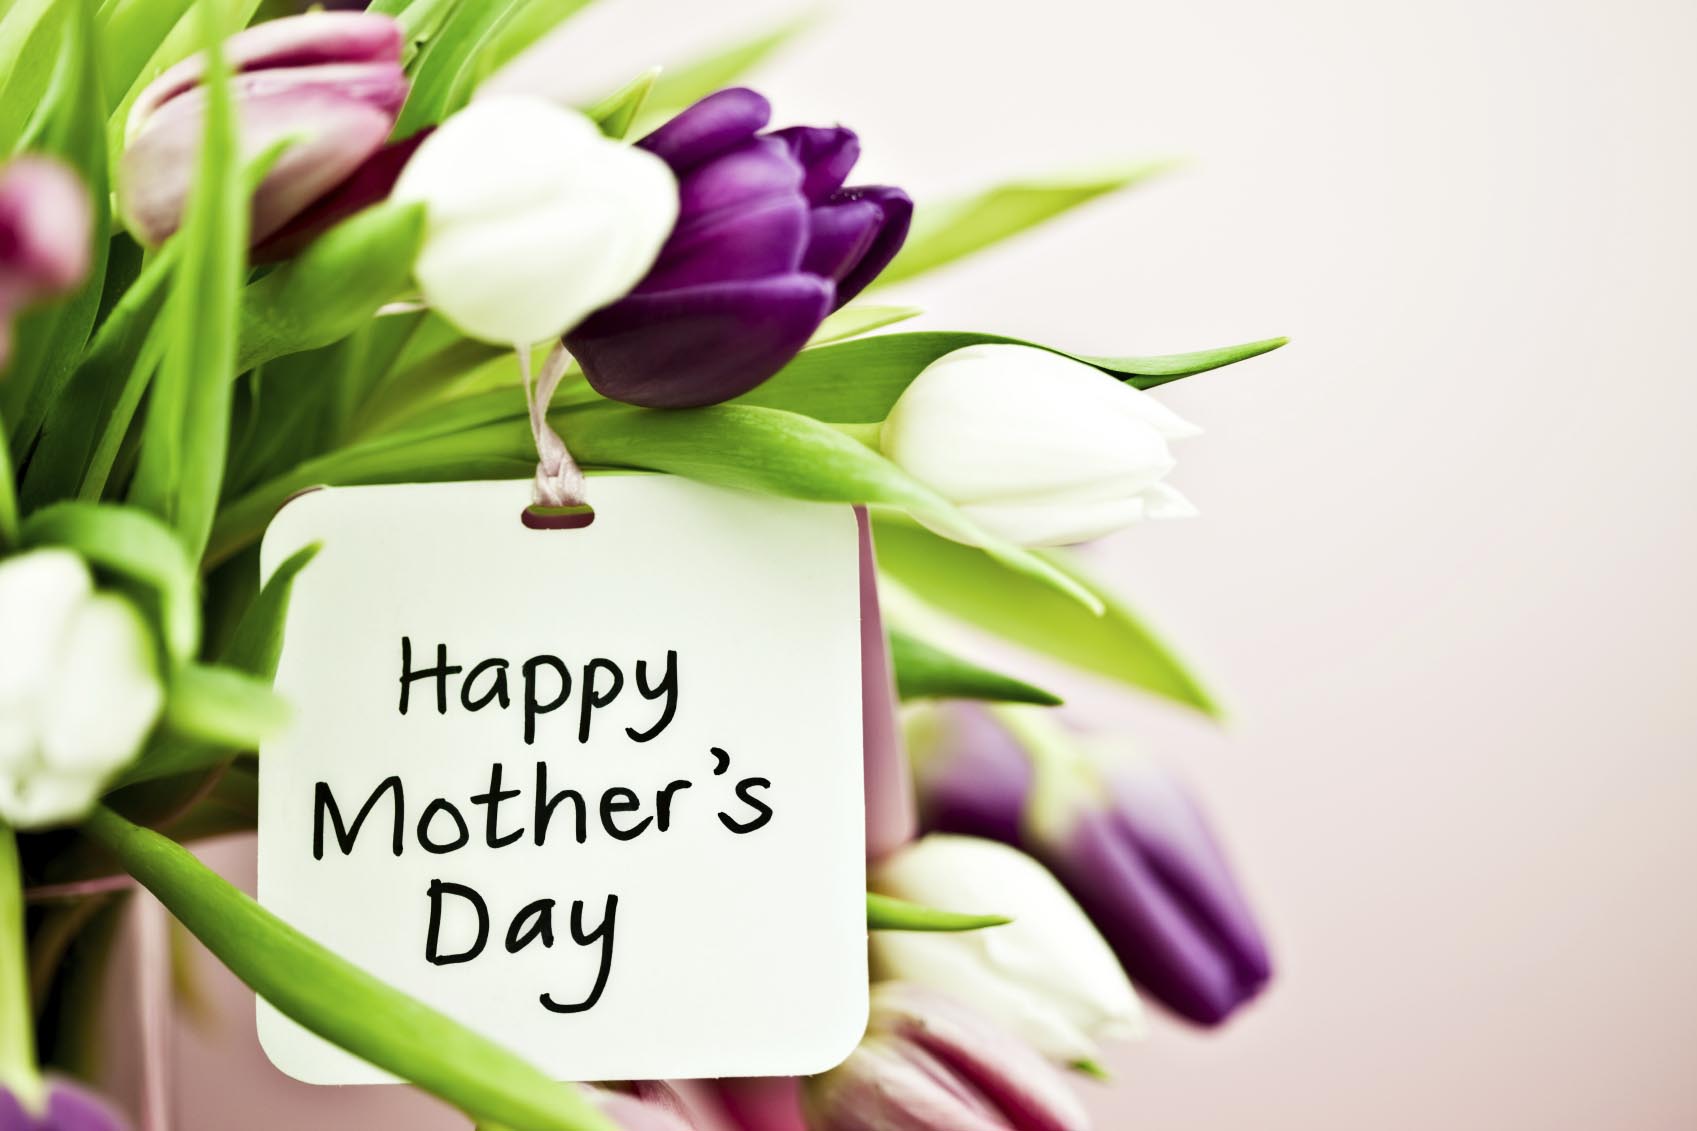 Happy Mother’s Day With Tulip Flowers